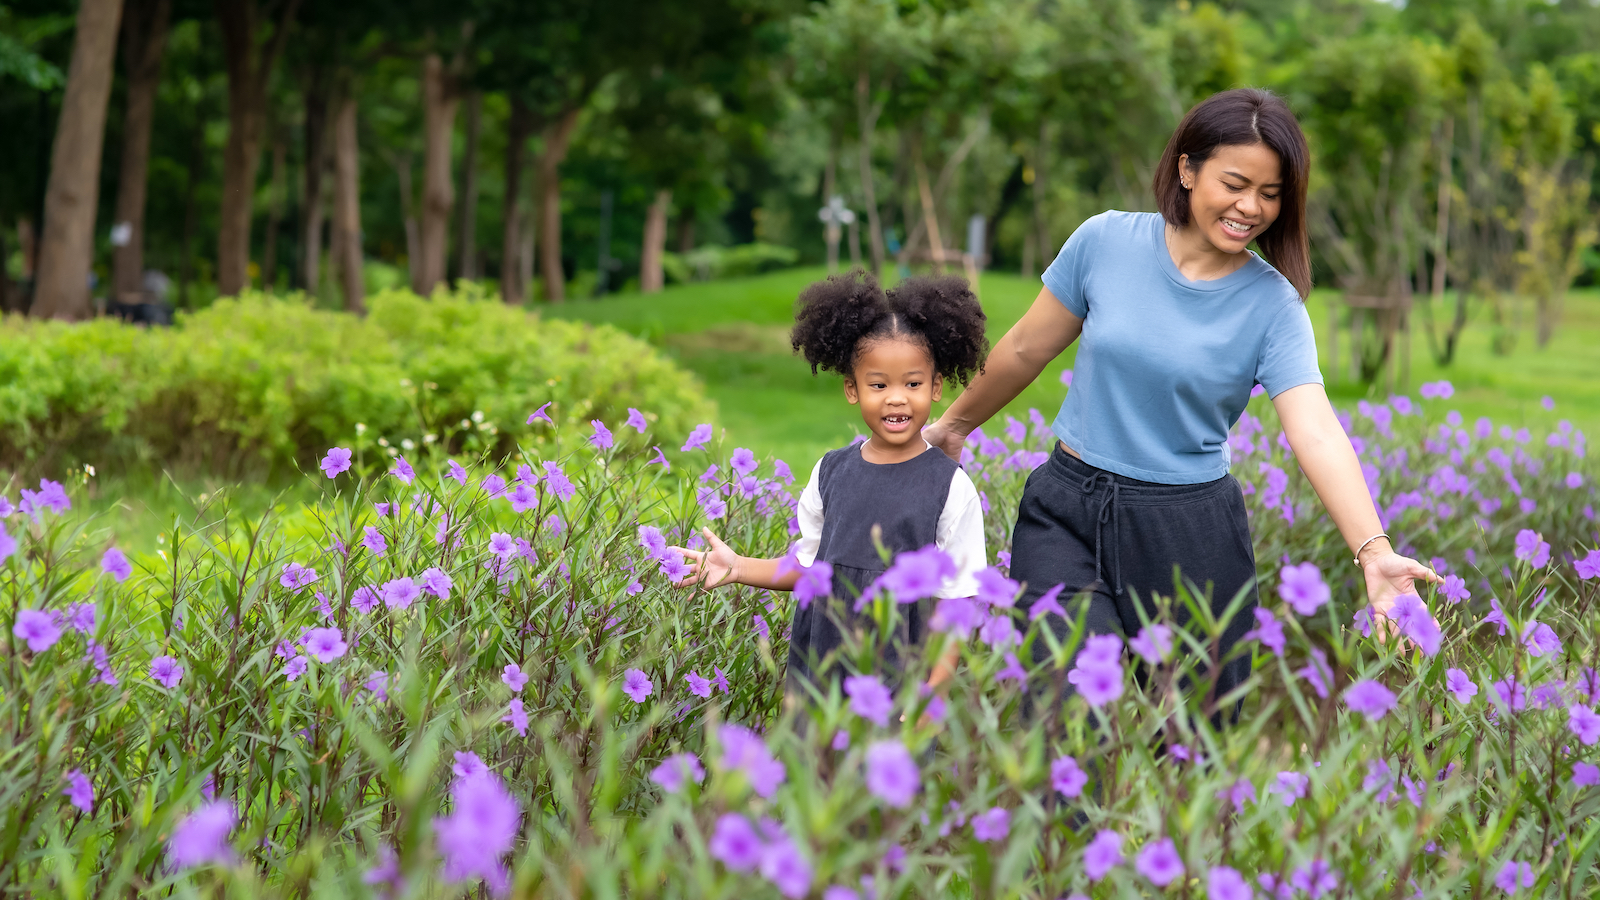 A woman and girl walk through a field of purple flowers.